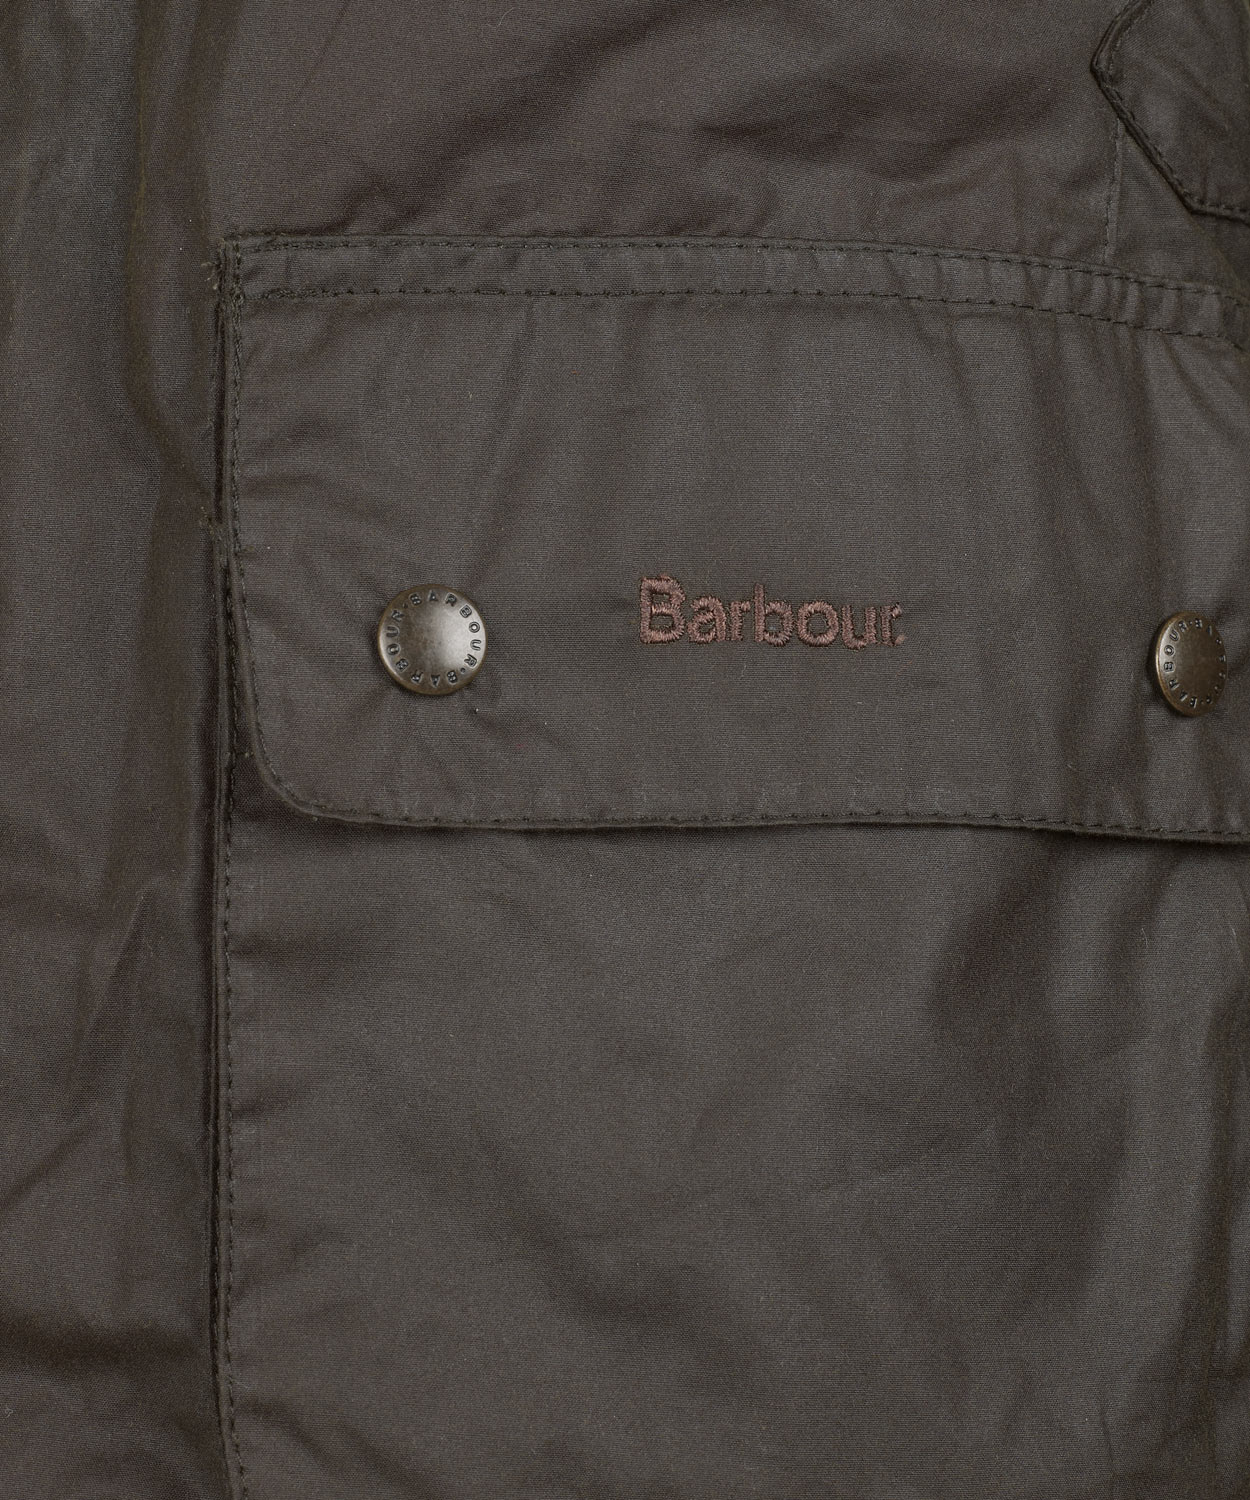 Barbour Olive Cycling Shirt Waxed Jacket in Green for Men - Lyst